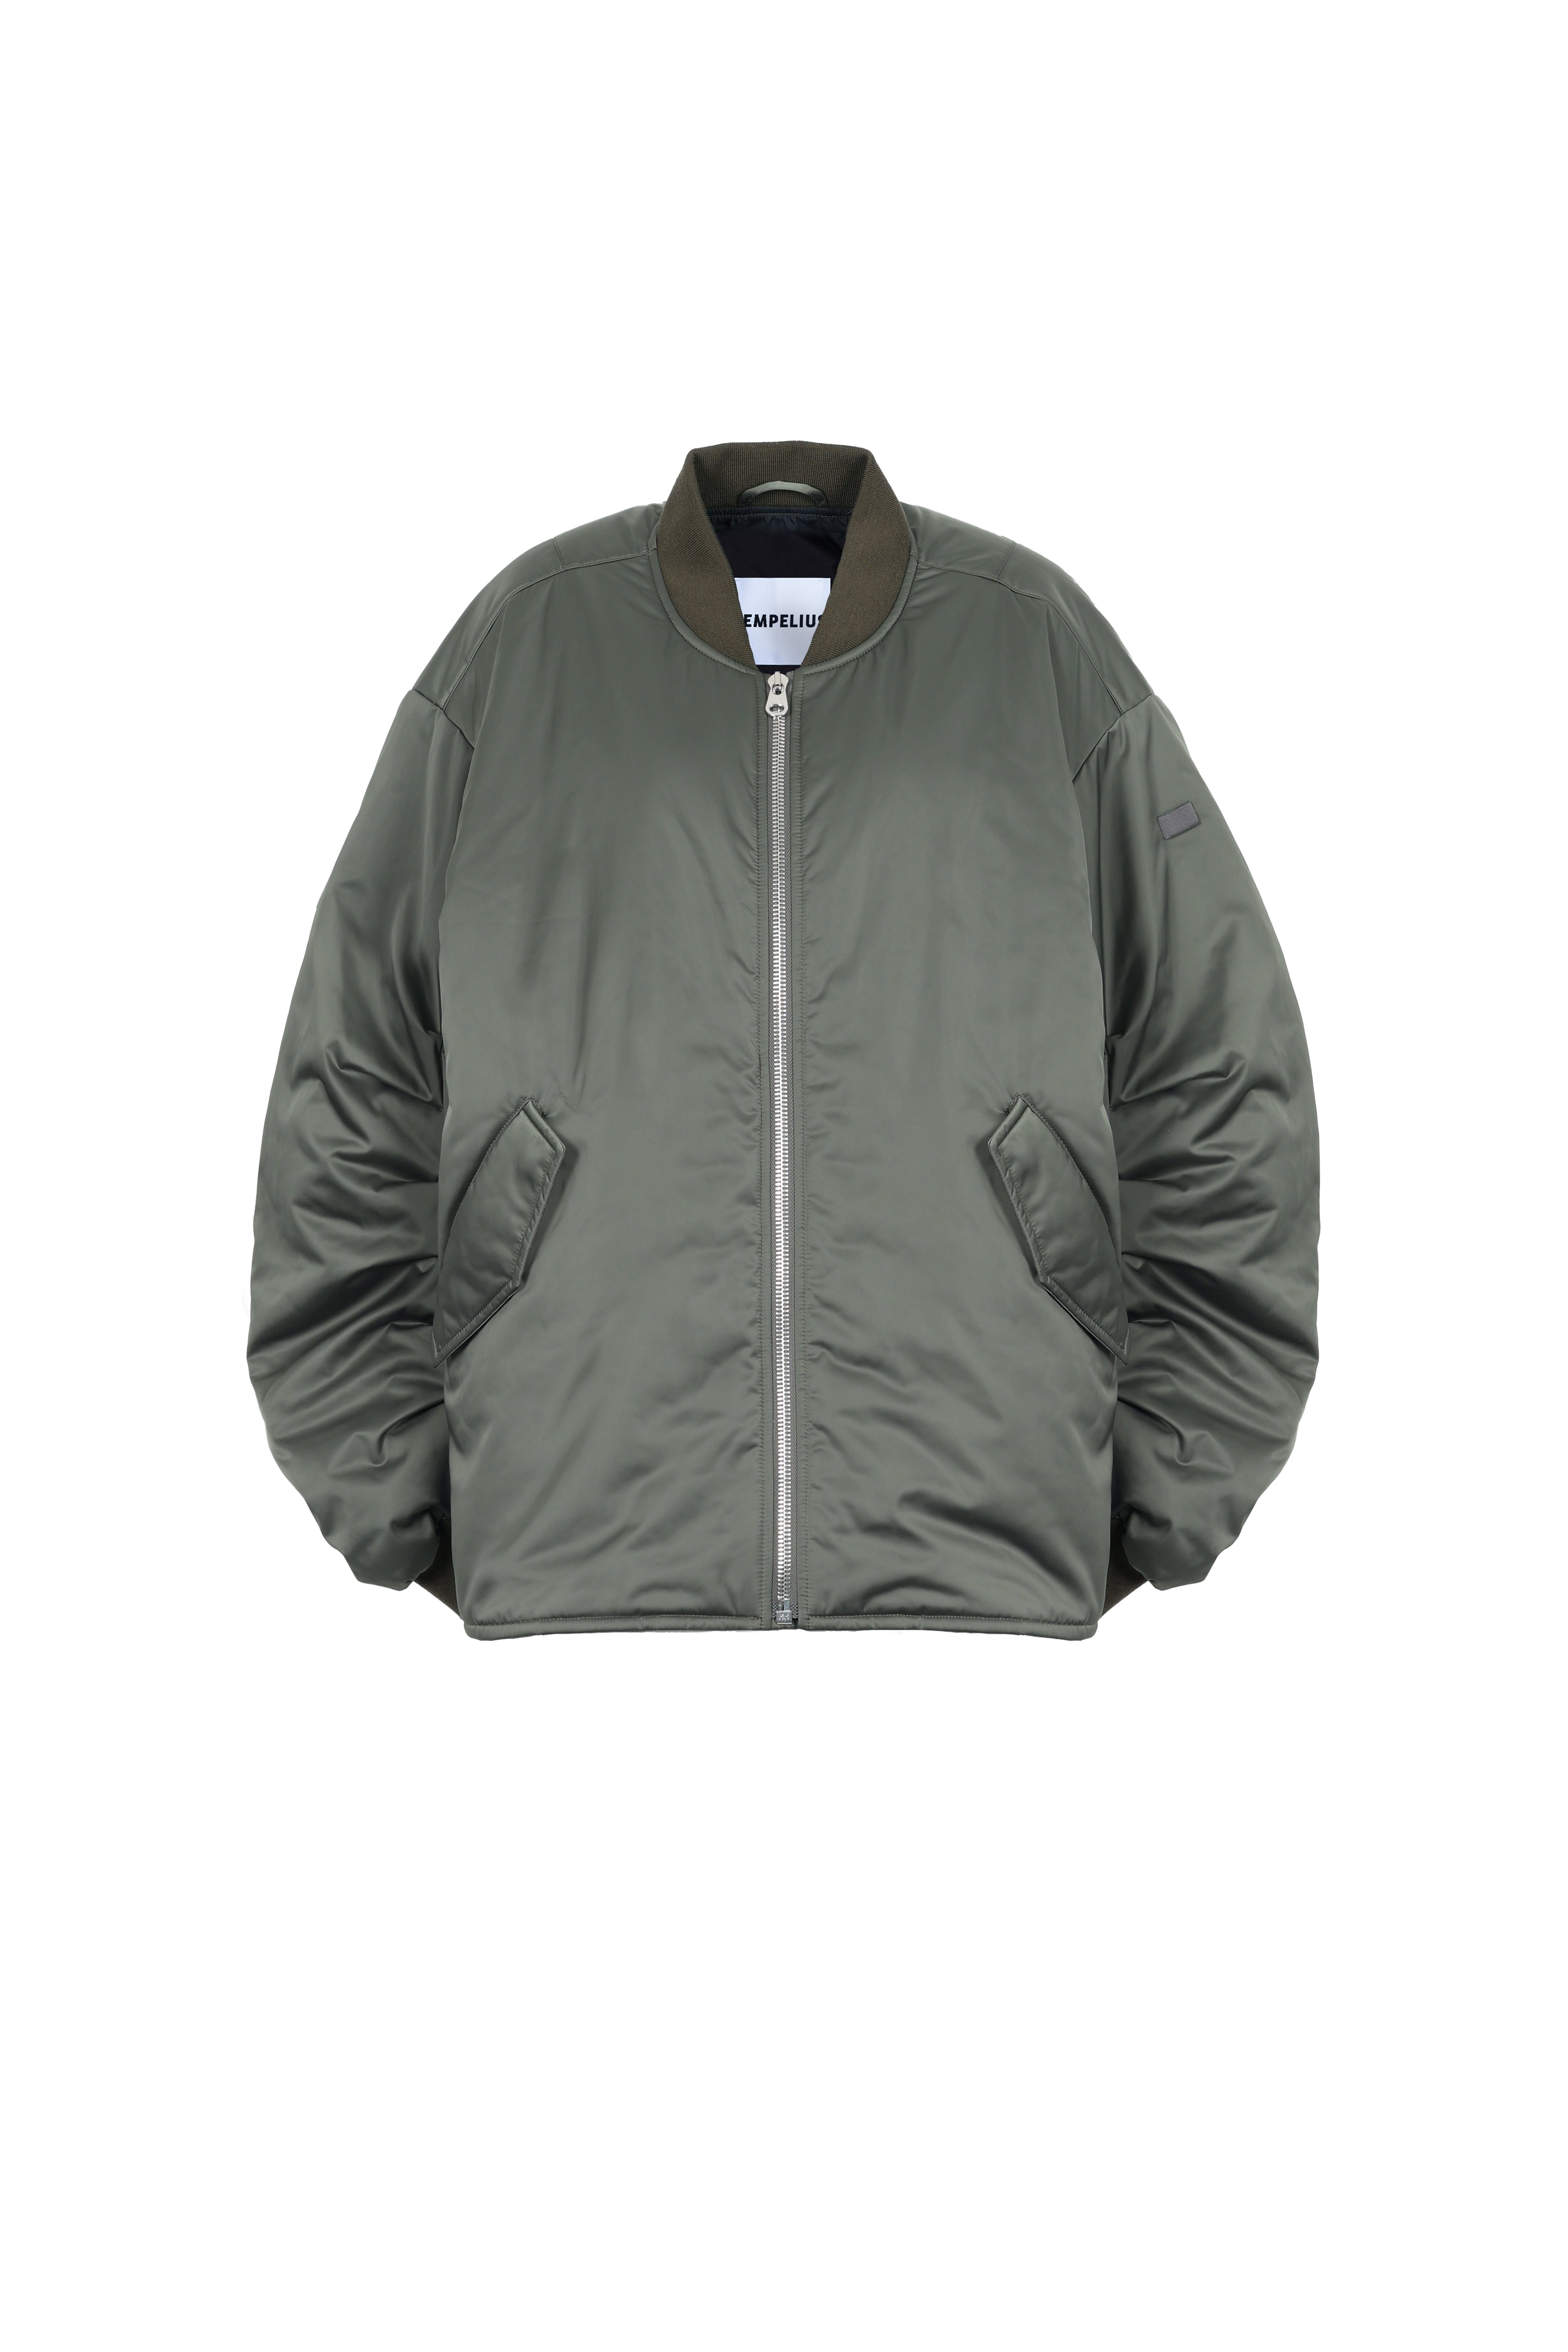 FLARED BOMBER JACKET in green amber